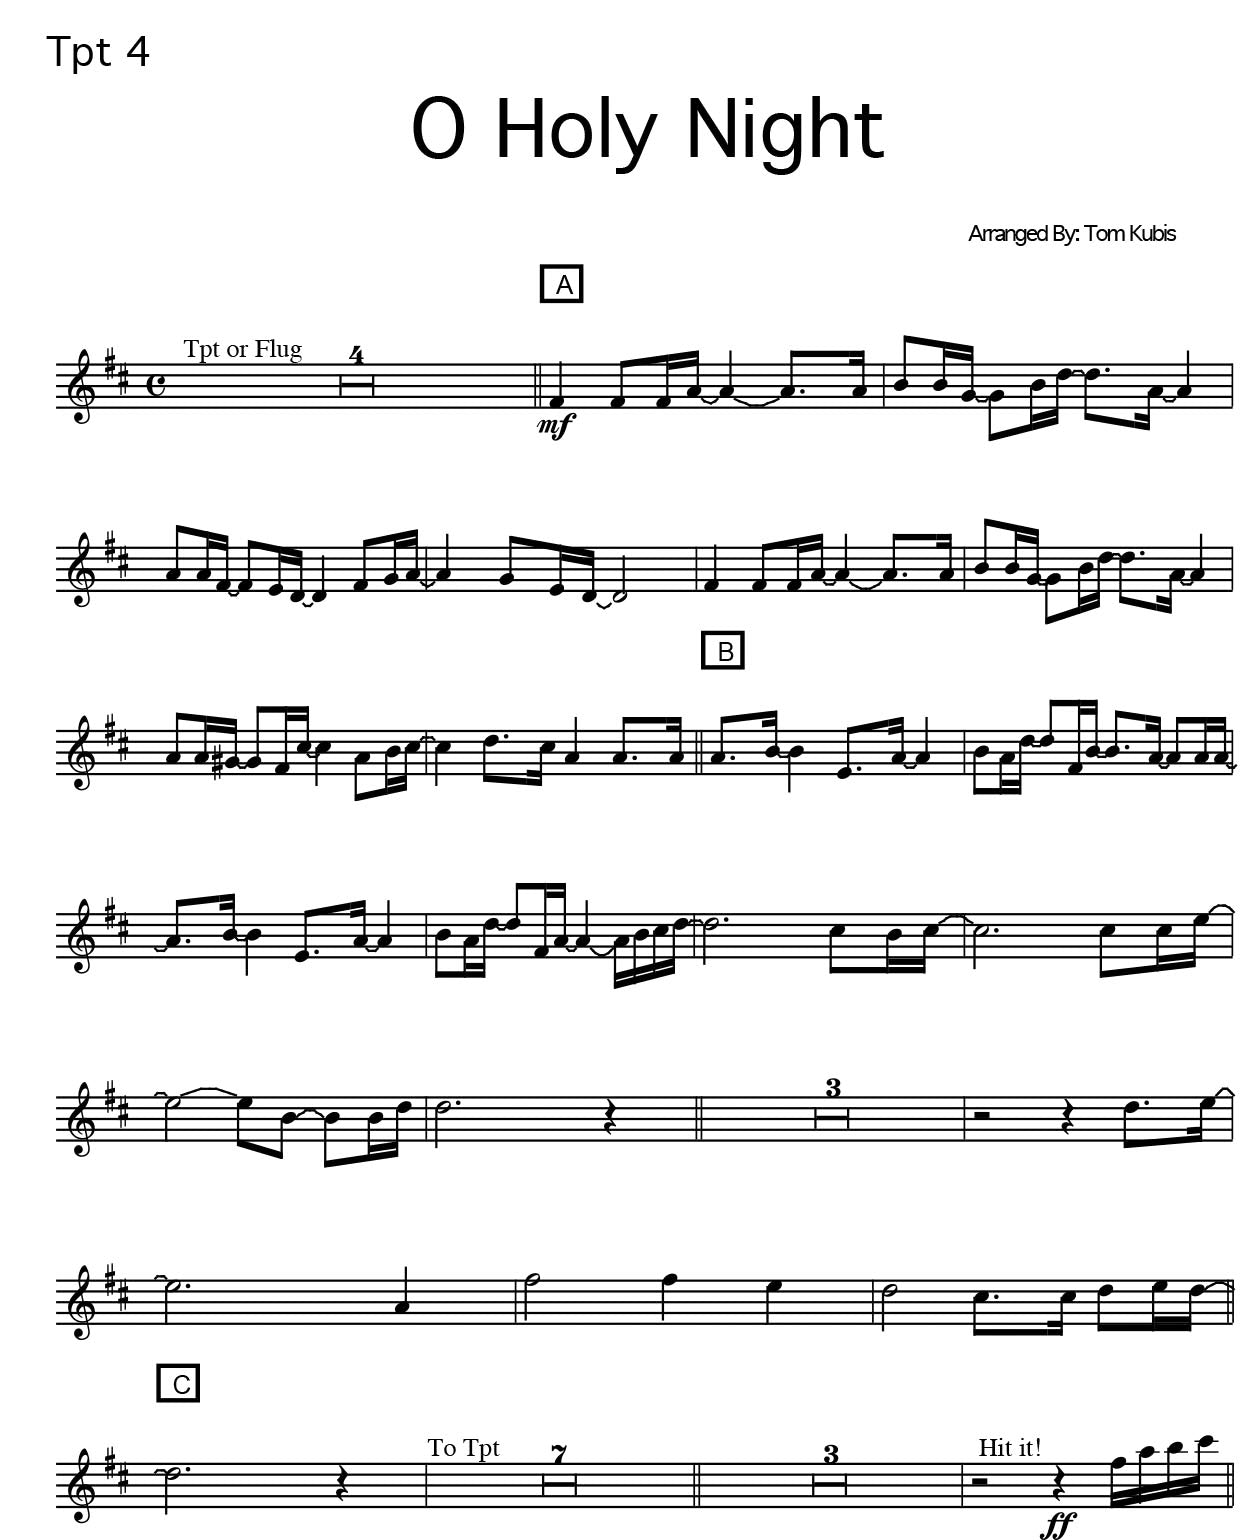 Oh Holy Night – TomKubis